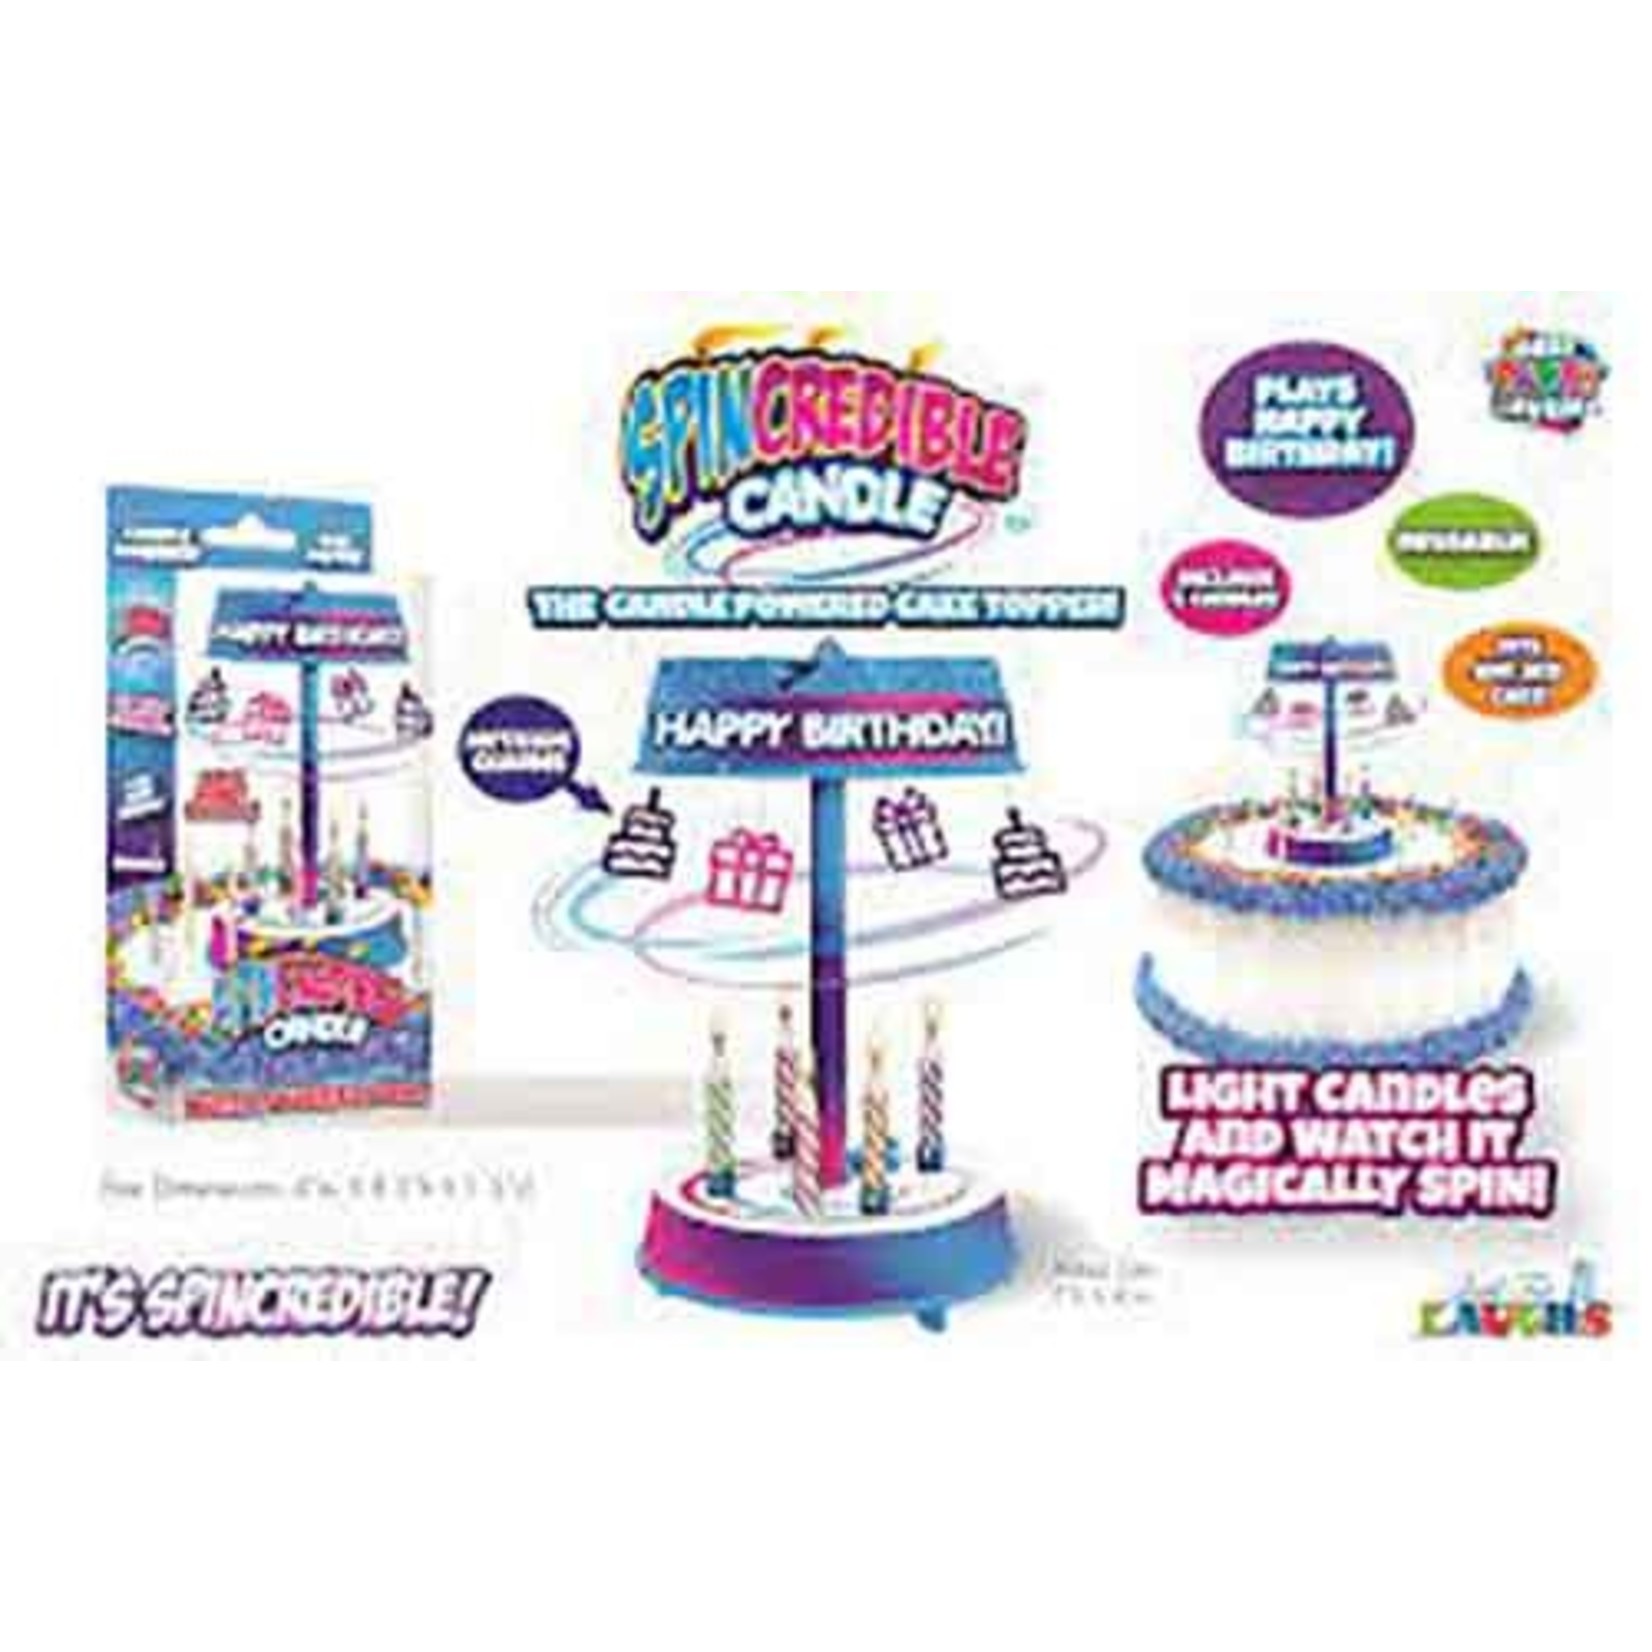 Just For Laughs Spin-Credible Birthday Candle - 1ct.